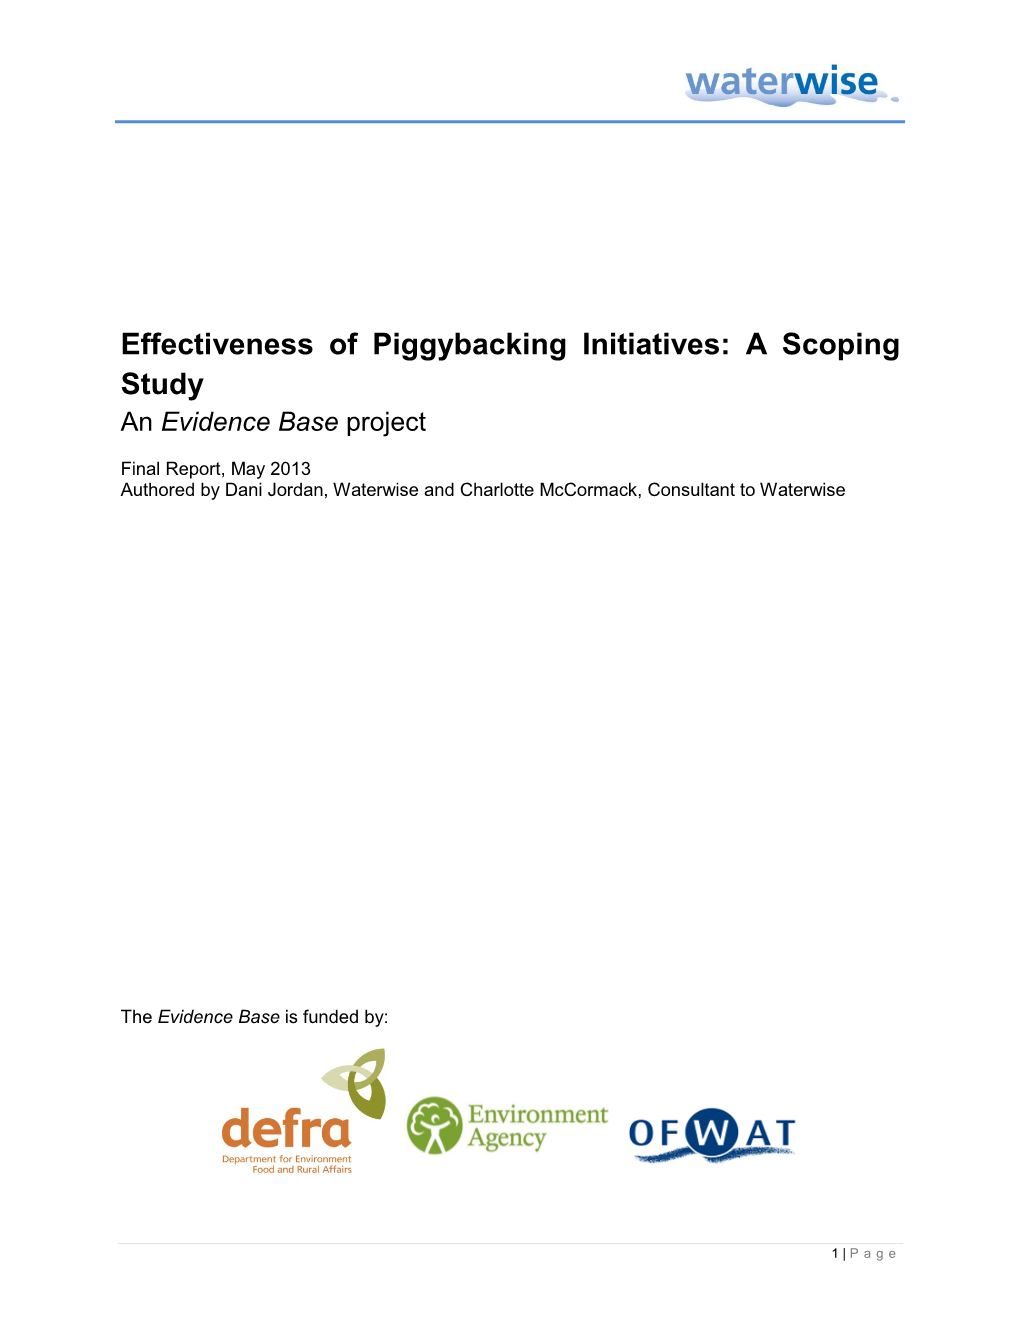 Effectiveness of Piggybacking Initiatives: a Scoping Study an Evidence Base Project